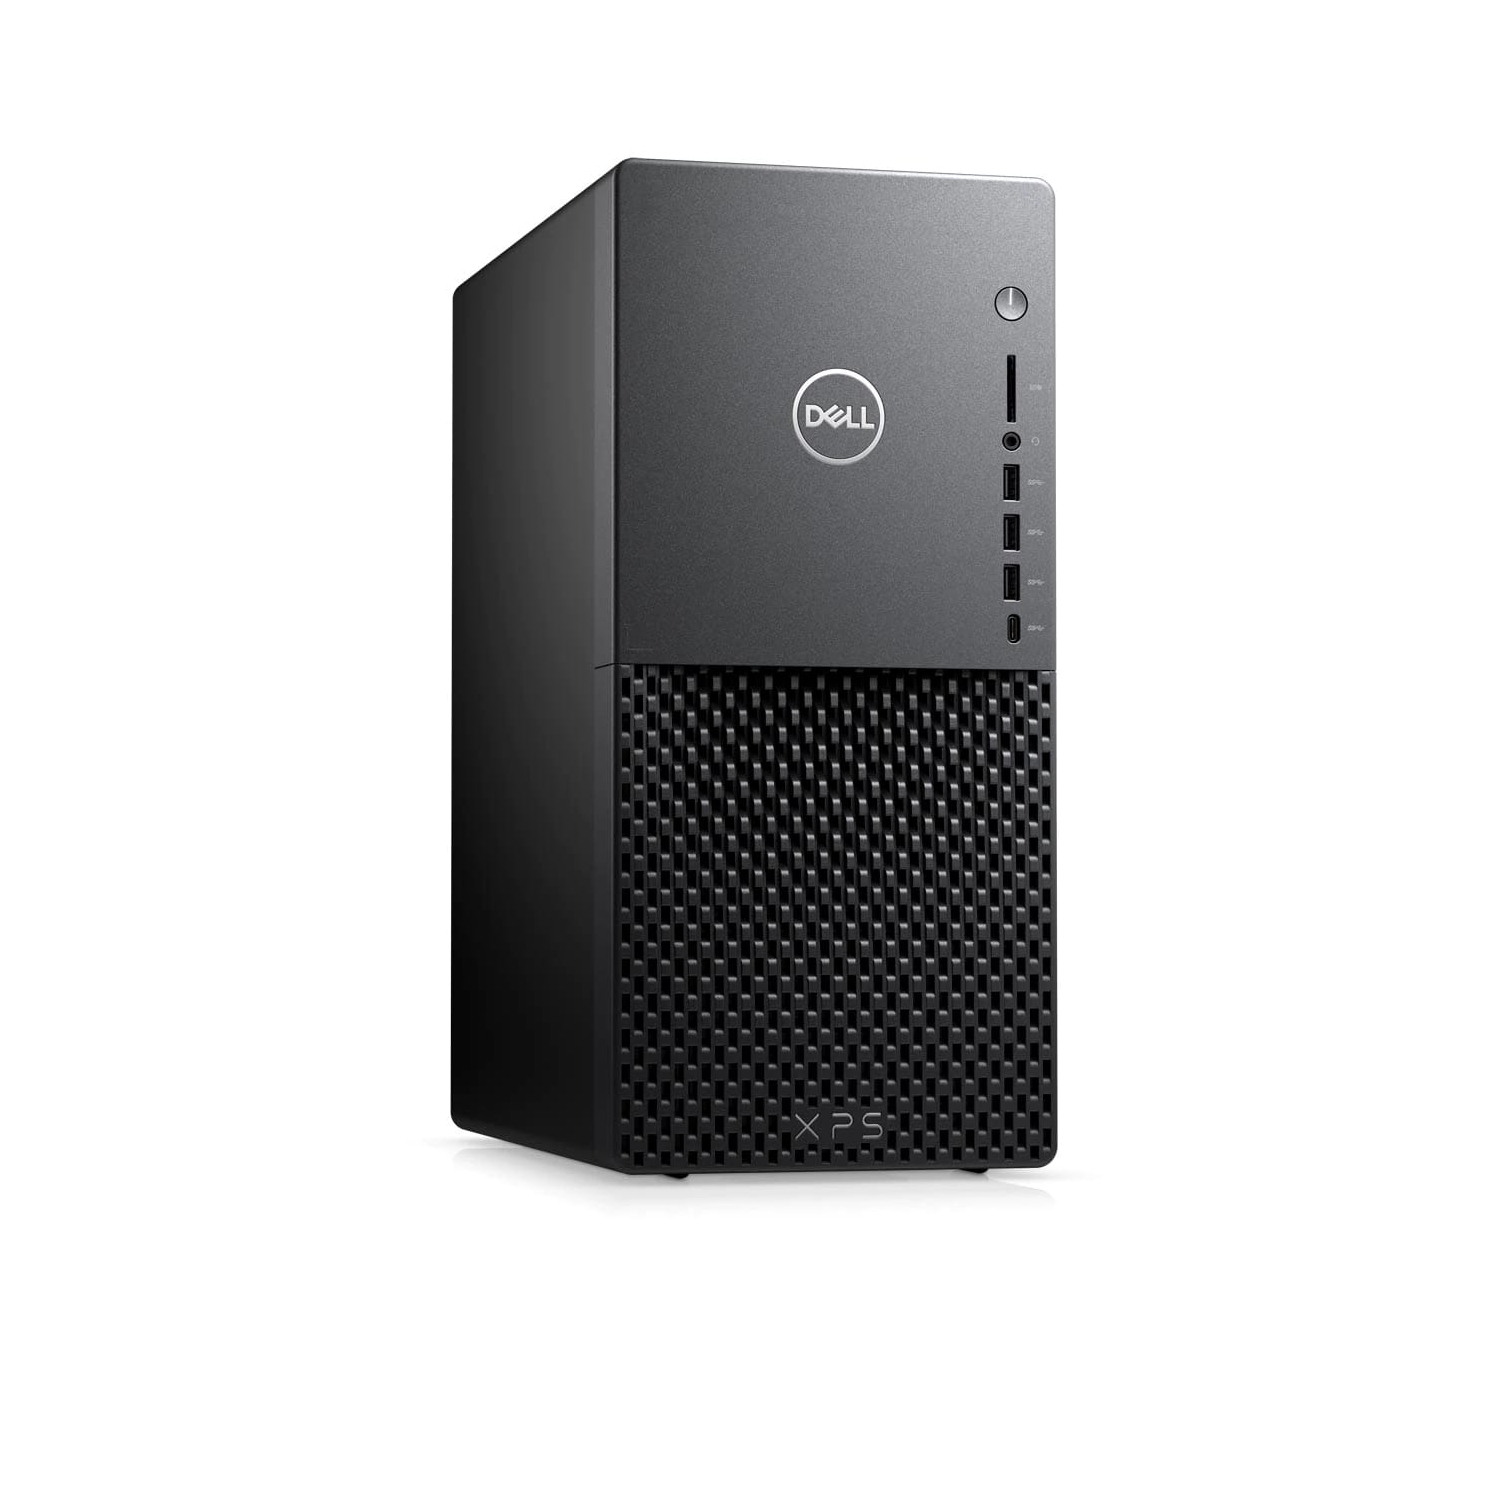 Refurbished (Excellent) - Dell XPS 8940 Desktop (2020) | Core i7 - 2TB HDD + 1TB SSD - 32GB RAM - GTX 1660 | 8 Cores @ 4.8 GHz - 10th Gen CPU Certified Refurbished